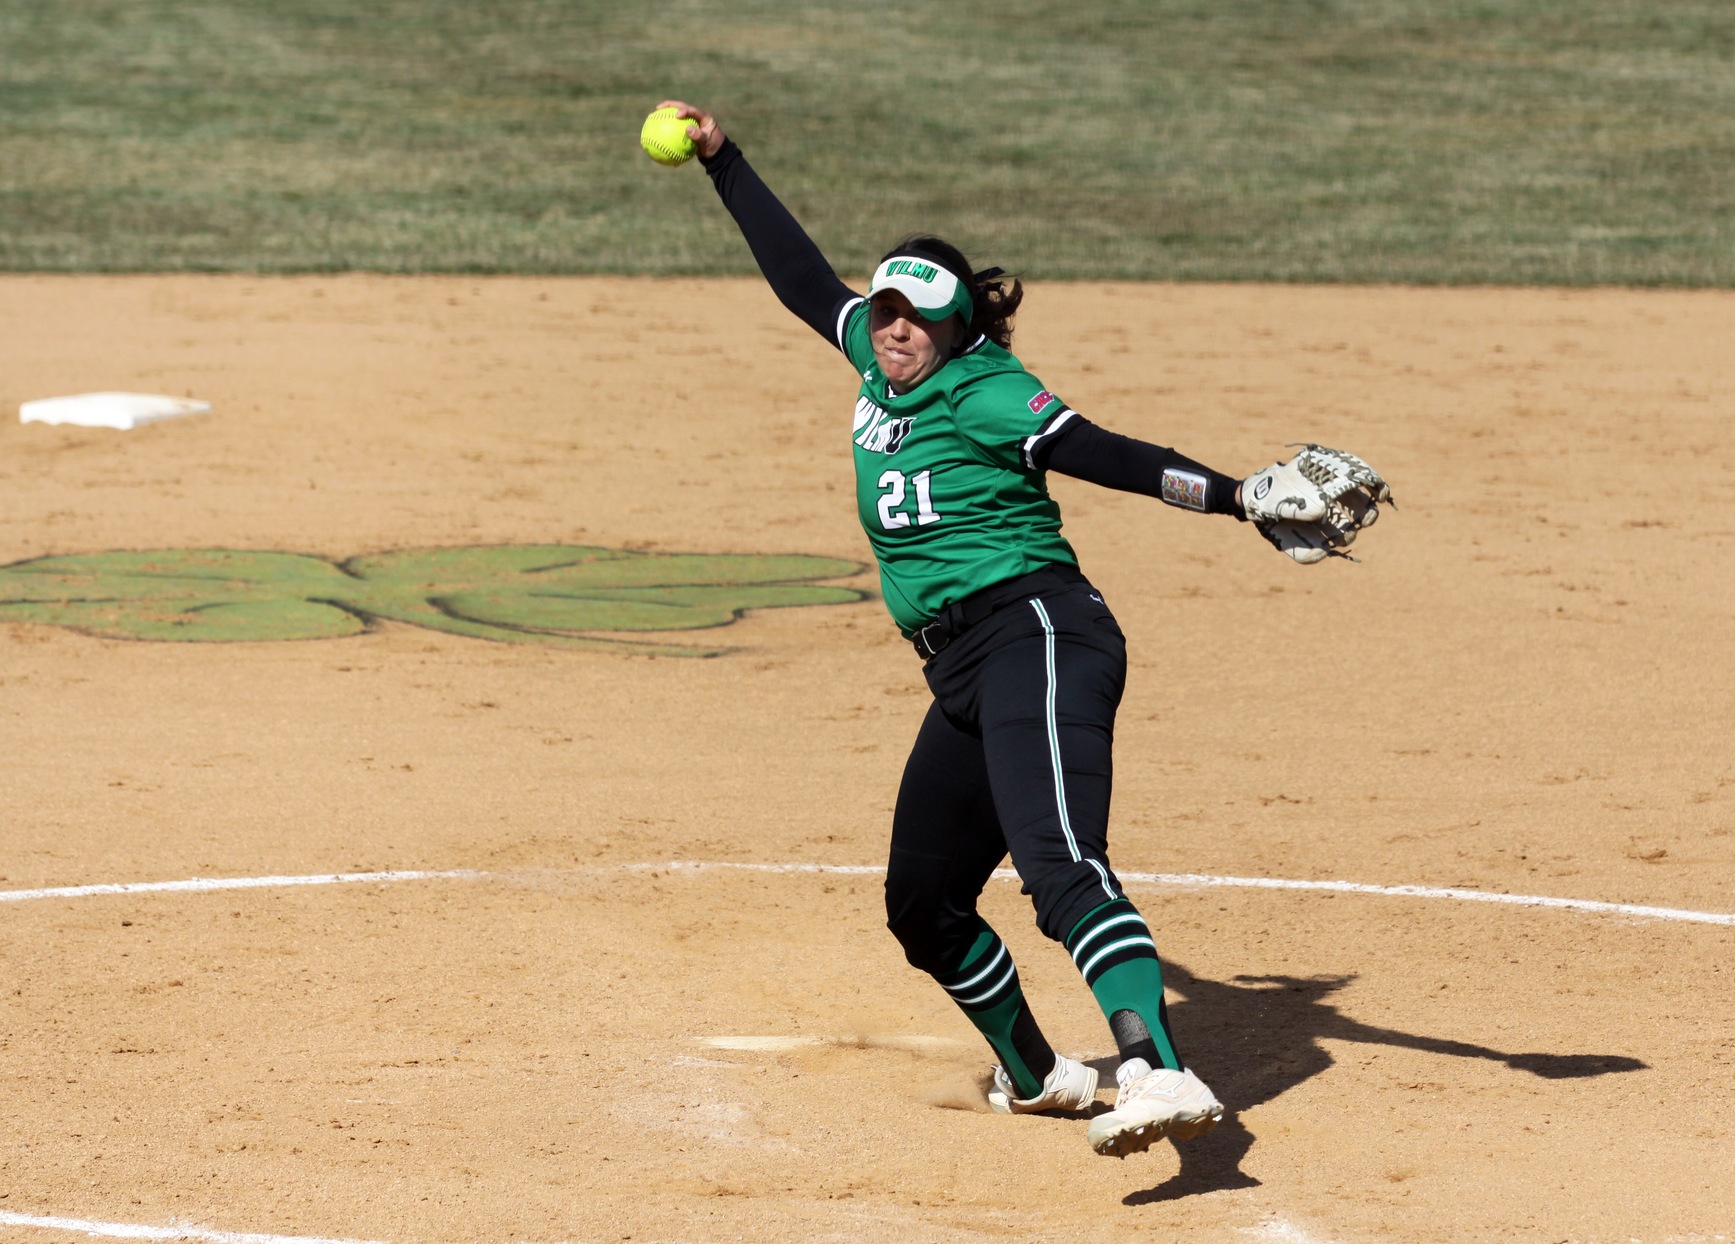 Copyright 2019; Wilmington University. All rights reserved. Photo of Caitlyn Whiteside in game two on Sunday. Photo by Dan Lauletta. March 17, 2019 vs. Pace.